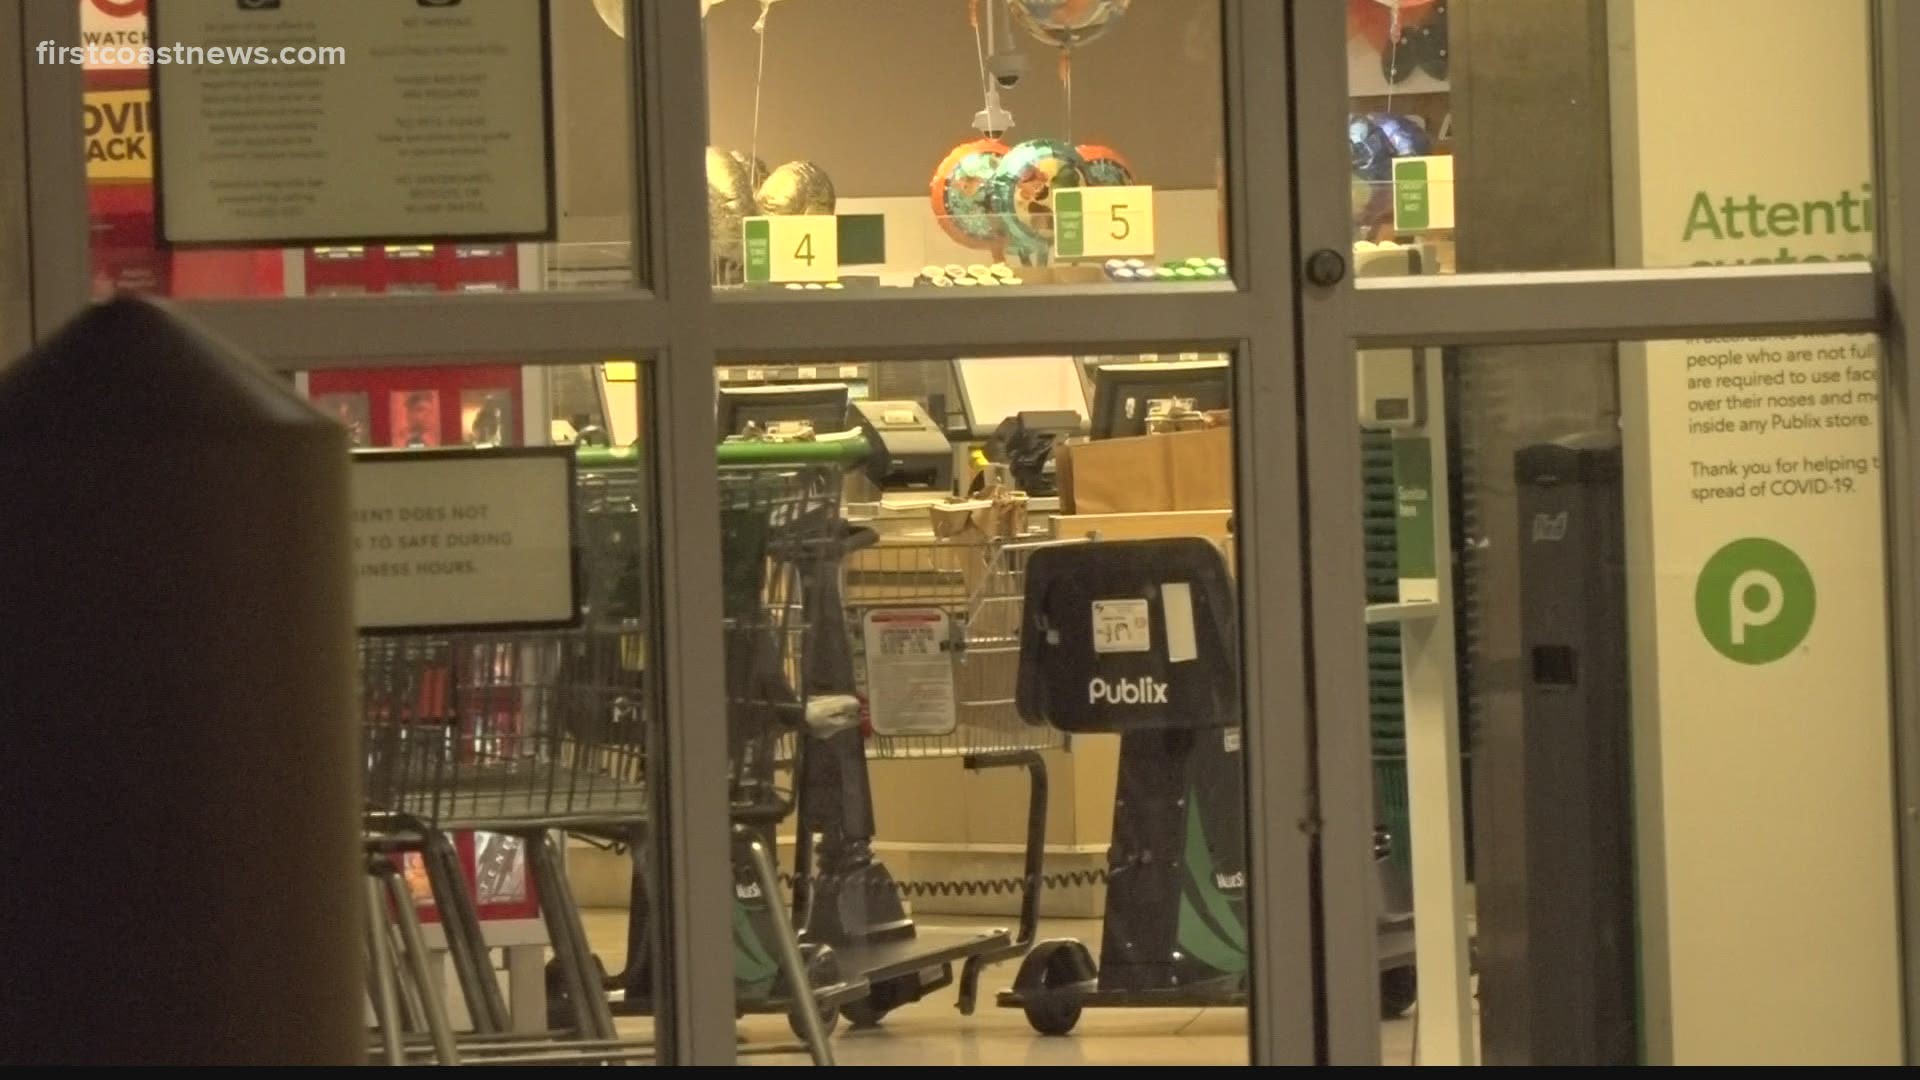 Jacksonville Sheriff's Office received a call for an armed robbery at a Publix in Mandarin around 9:40 Thursday night.